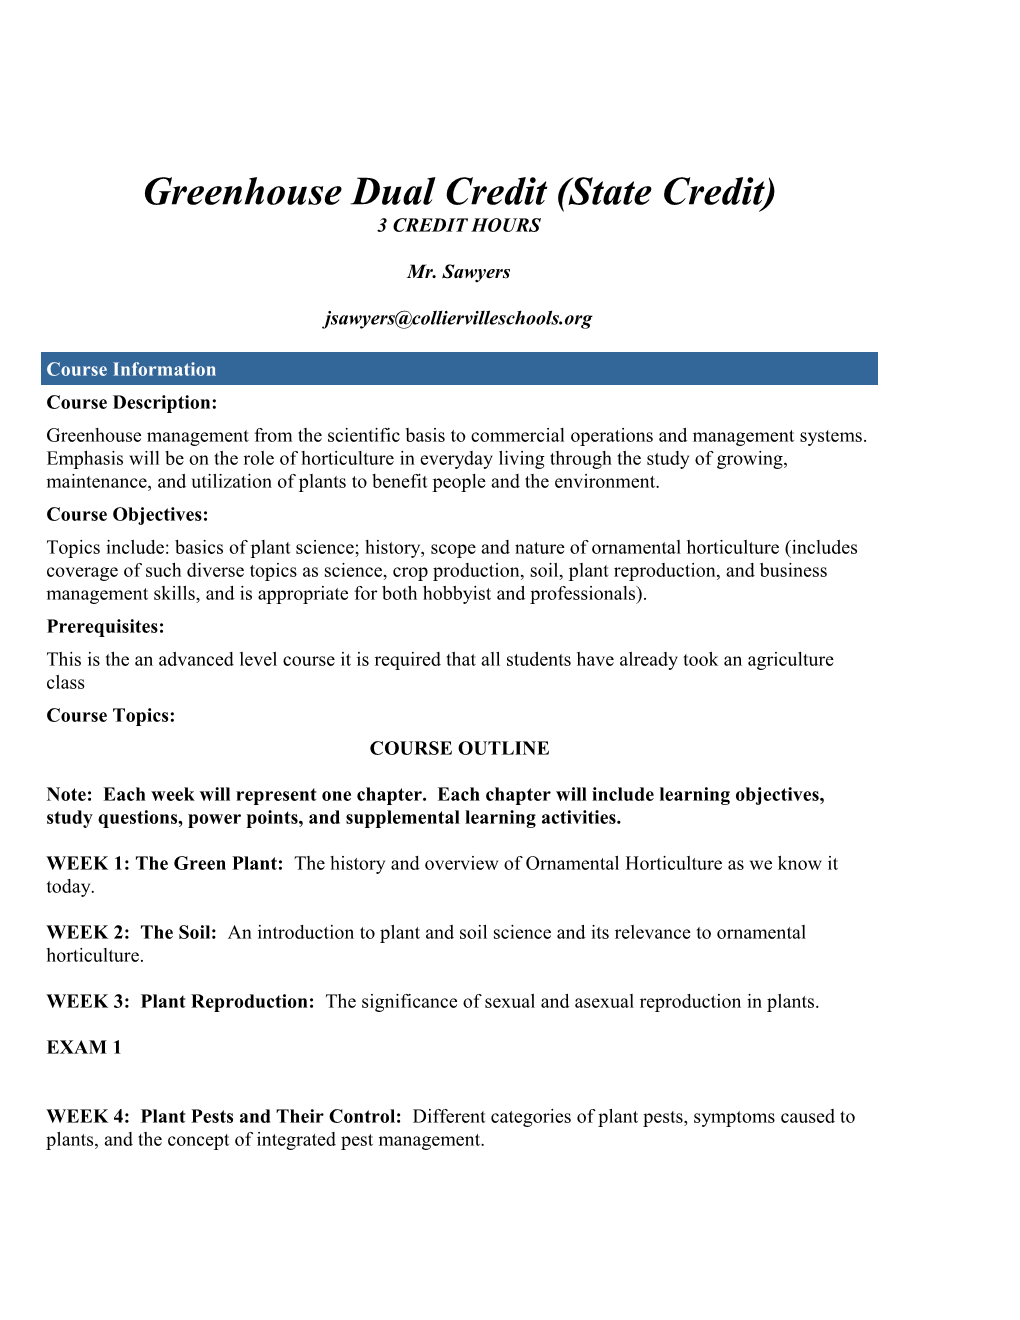 Greenhouse Dual Credit (State Credit) 3 CREDIT HOURS